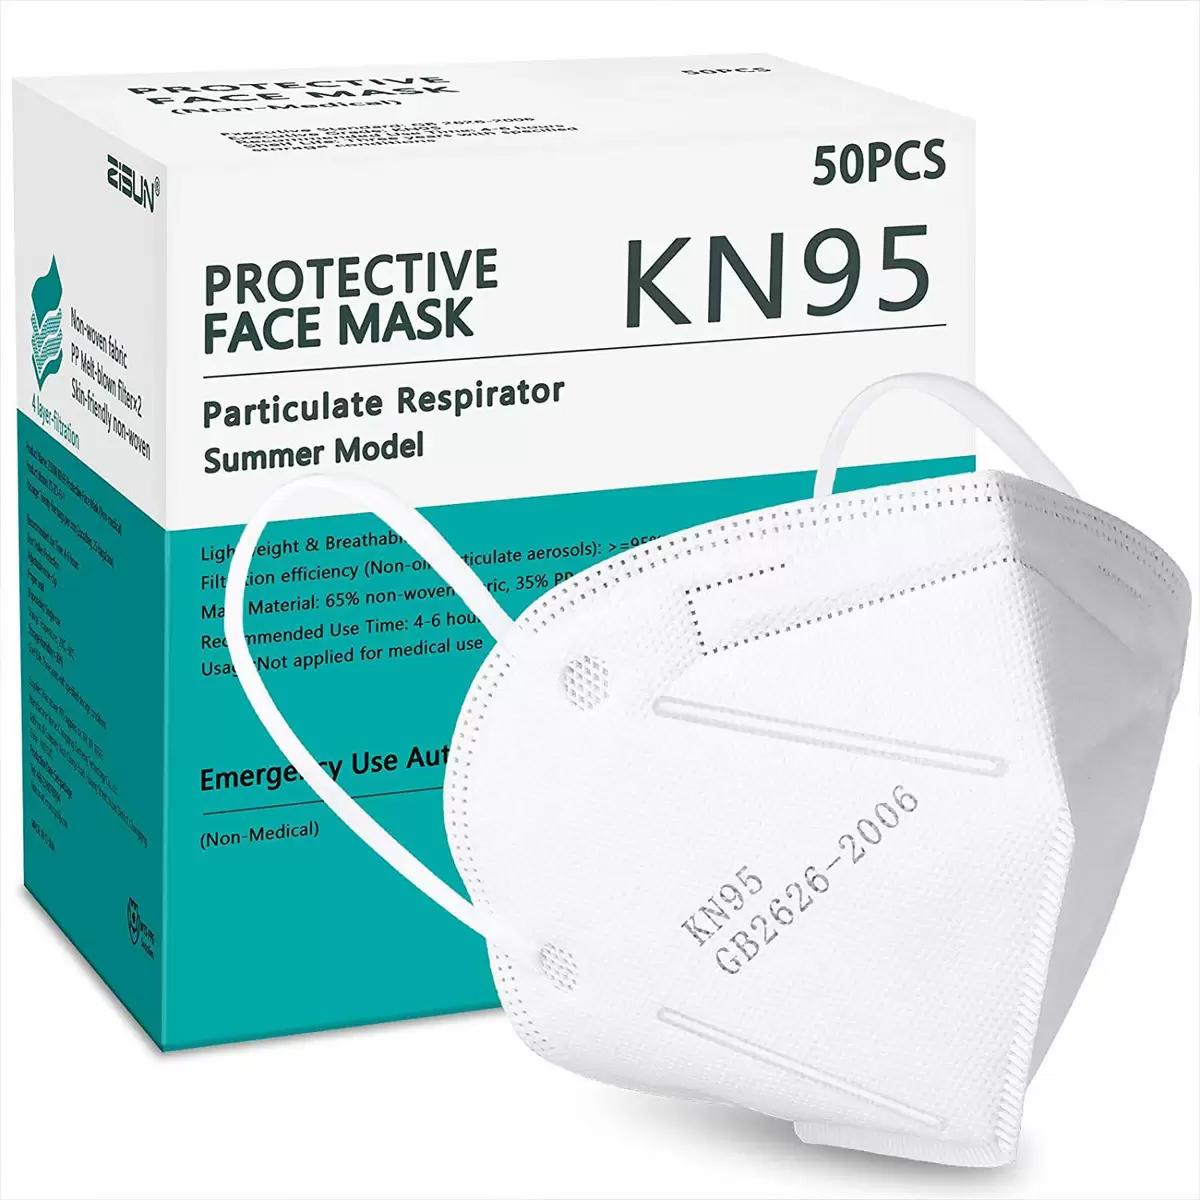 50 ChiSip KN95 Face Mask for $6.51 Shipped